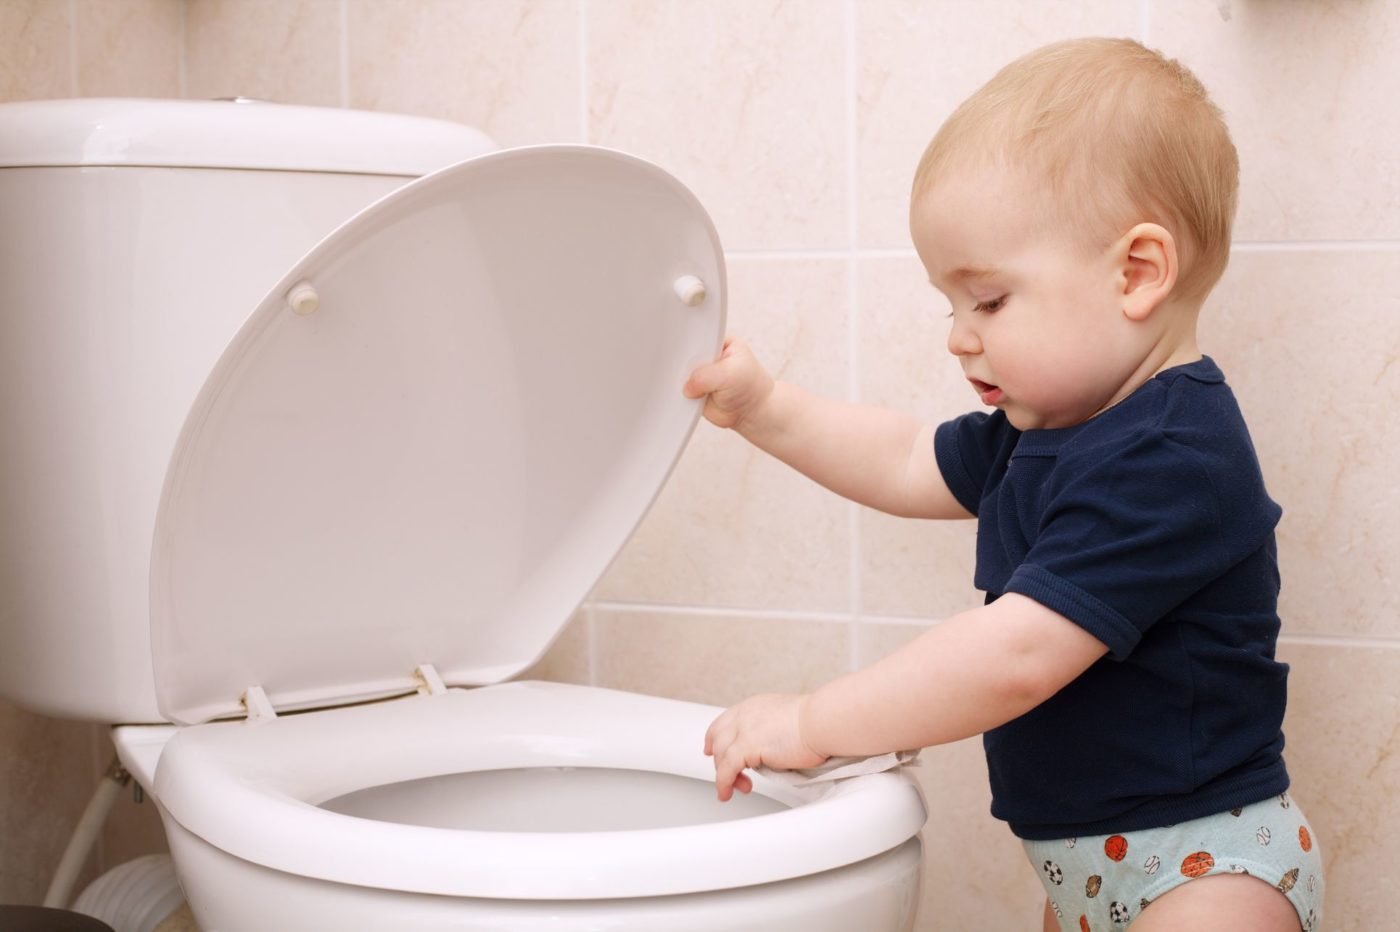 A kid playing with a toilet bowl